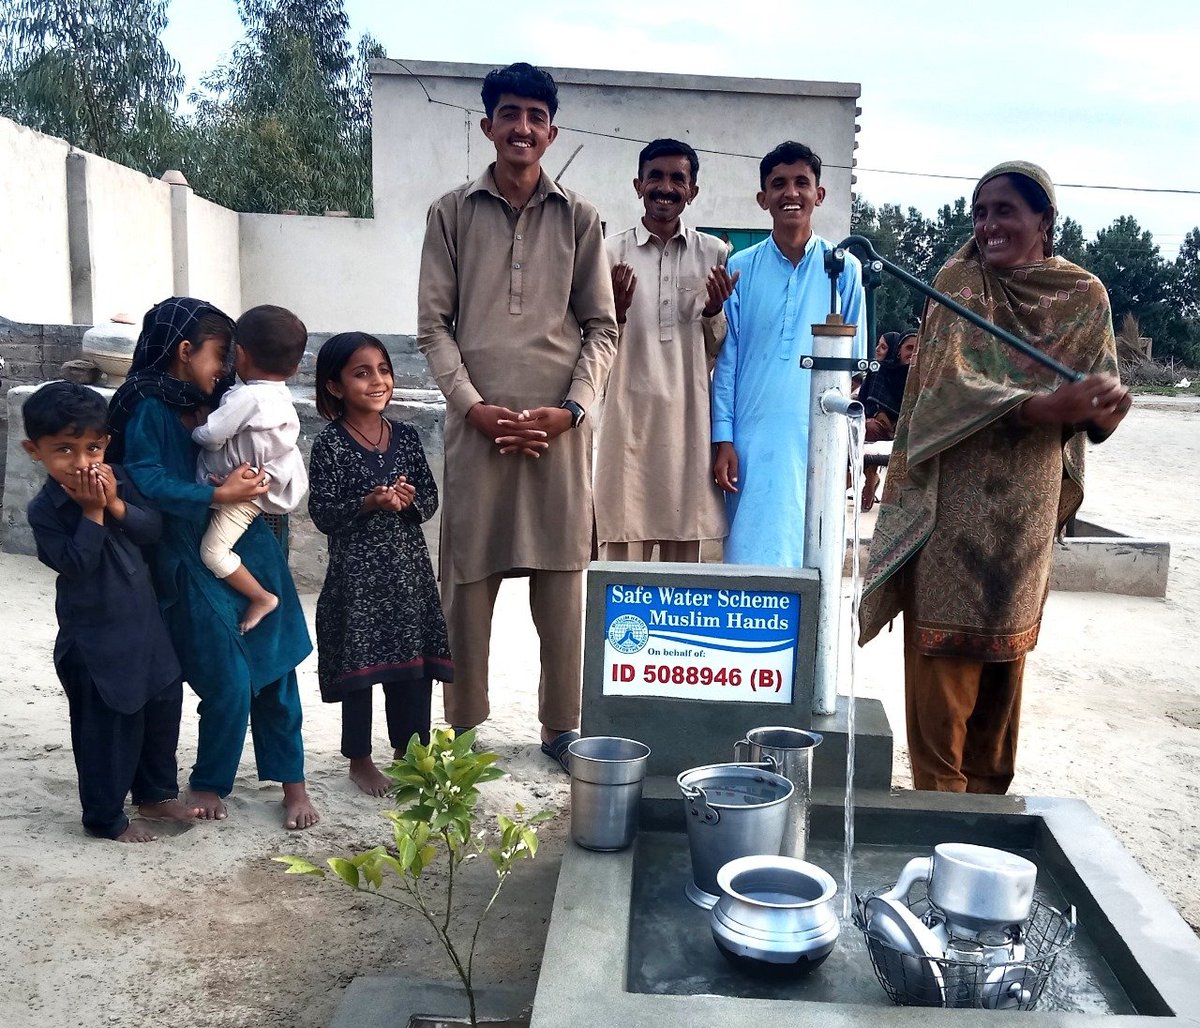 75 tube wells courtesy of Muslim Hands, now provide clean water to 525 beneficiaries in Bhakkar, Punjab, advancing SDG#6. With hygiene sessions, O&M kits, and training, we're empowering communities for a healthier tomorrow. 
#WaterForAll #Empowerment